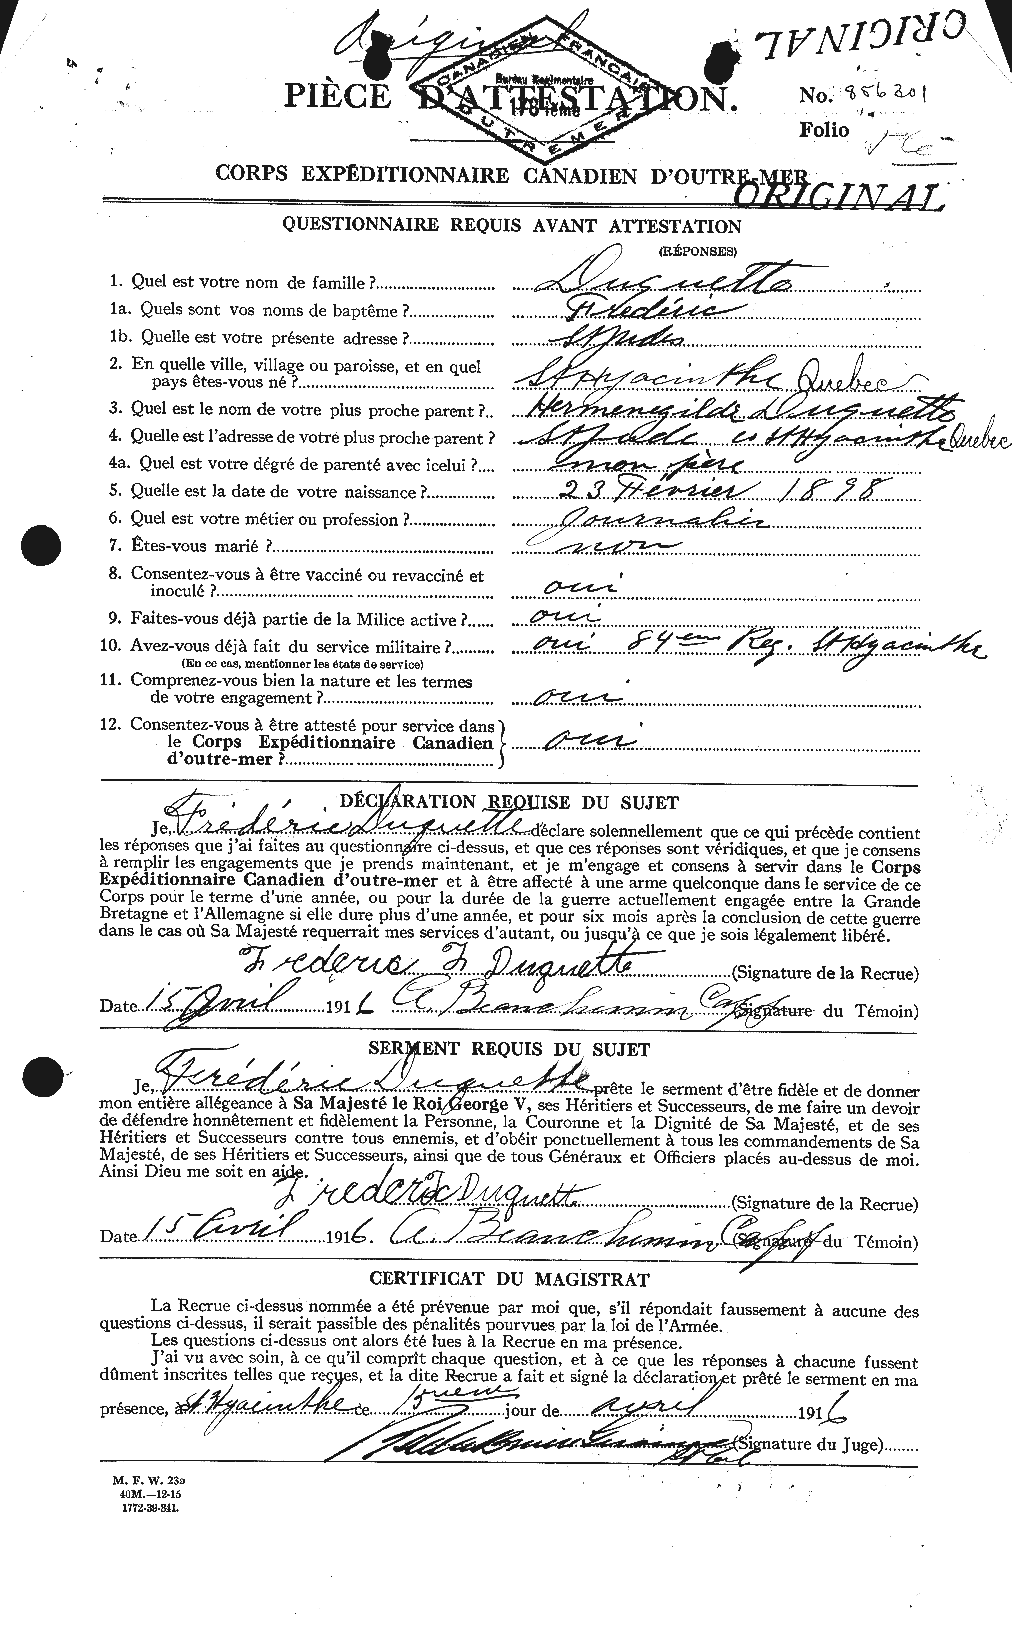 Personnel Records of the First World War - CEF 303387a